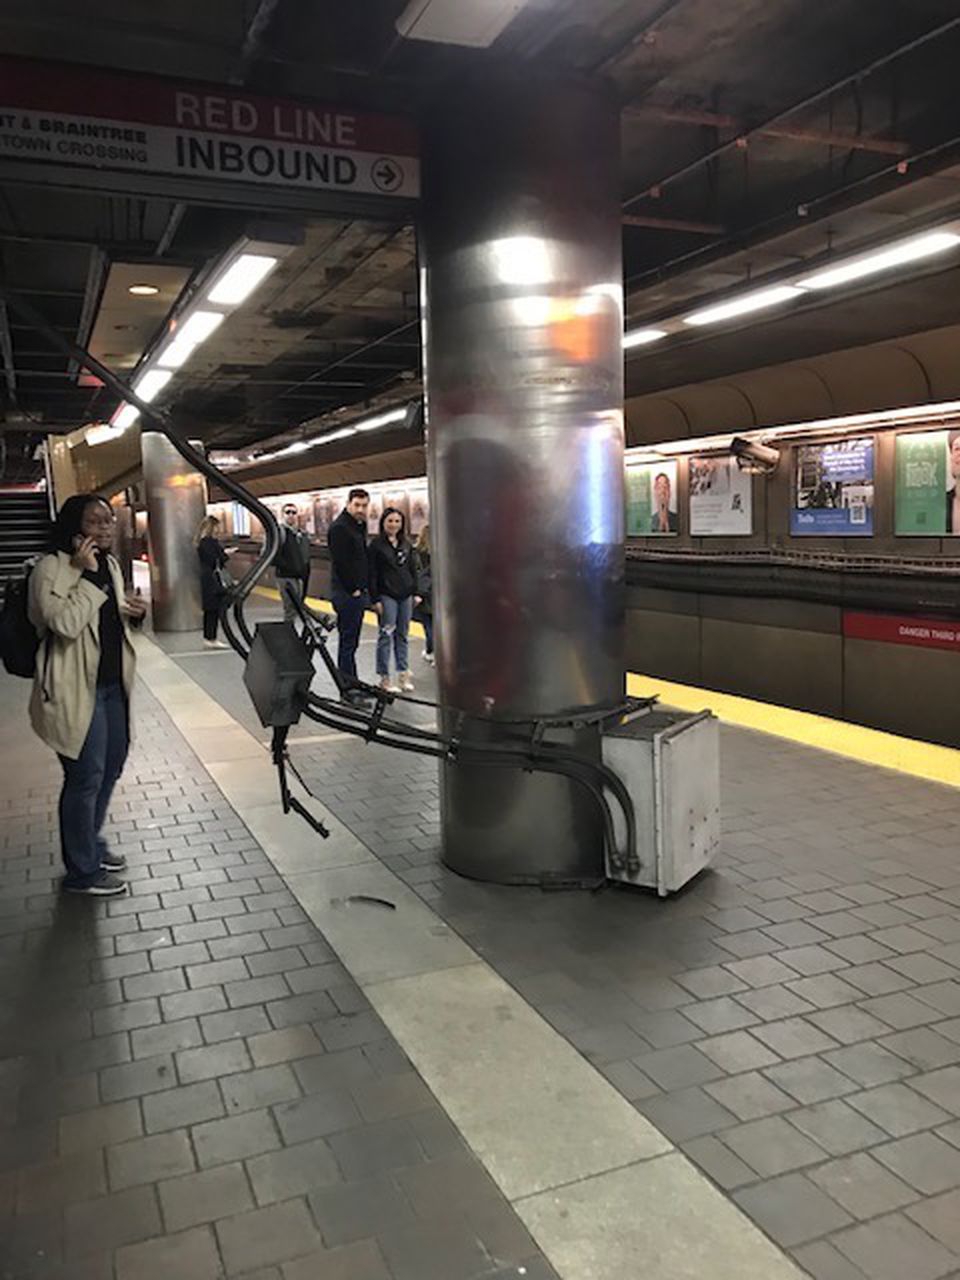 A piece of equipment fell from the top of a column at the Harvard MBTA station on Monday, striking a woman who was then taken to the hospital, officials said.